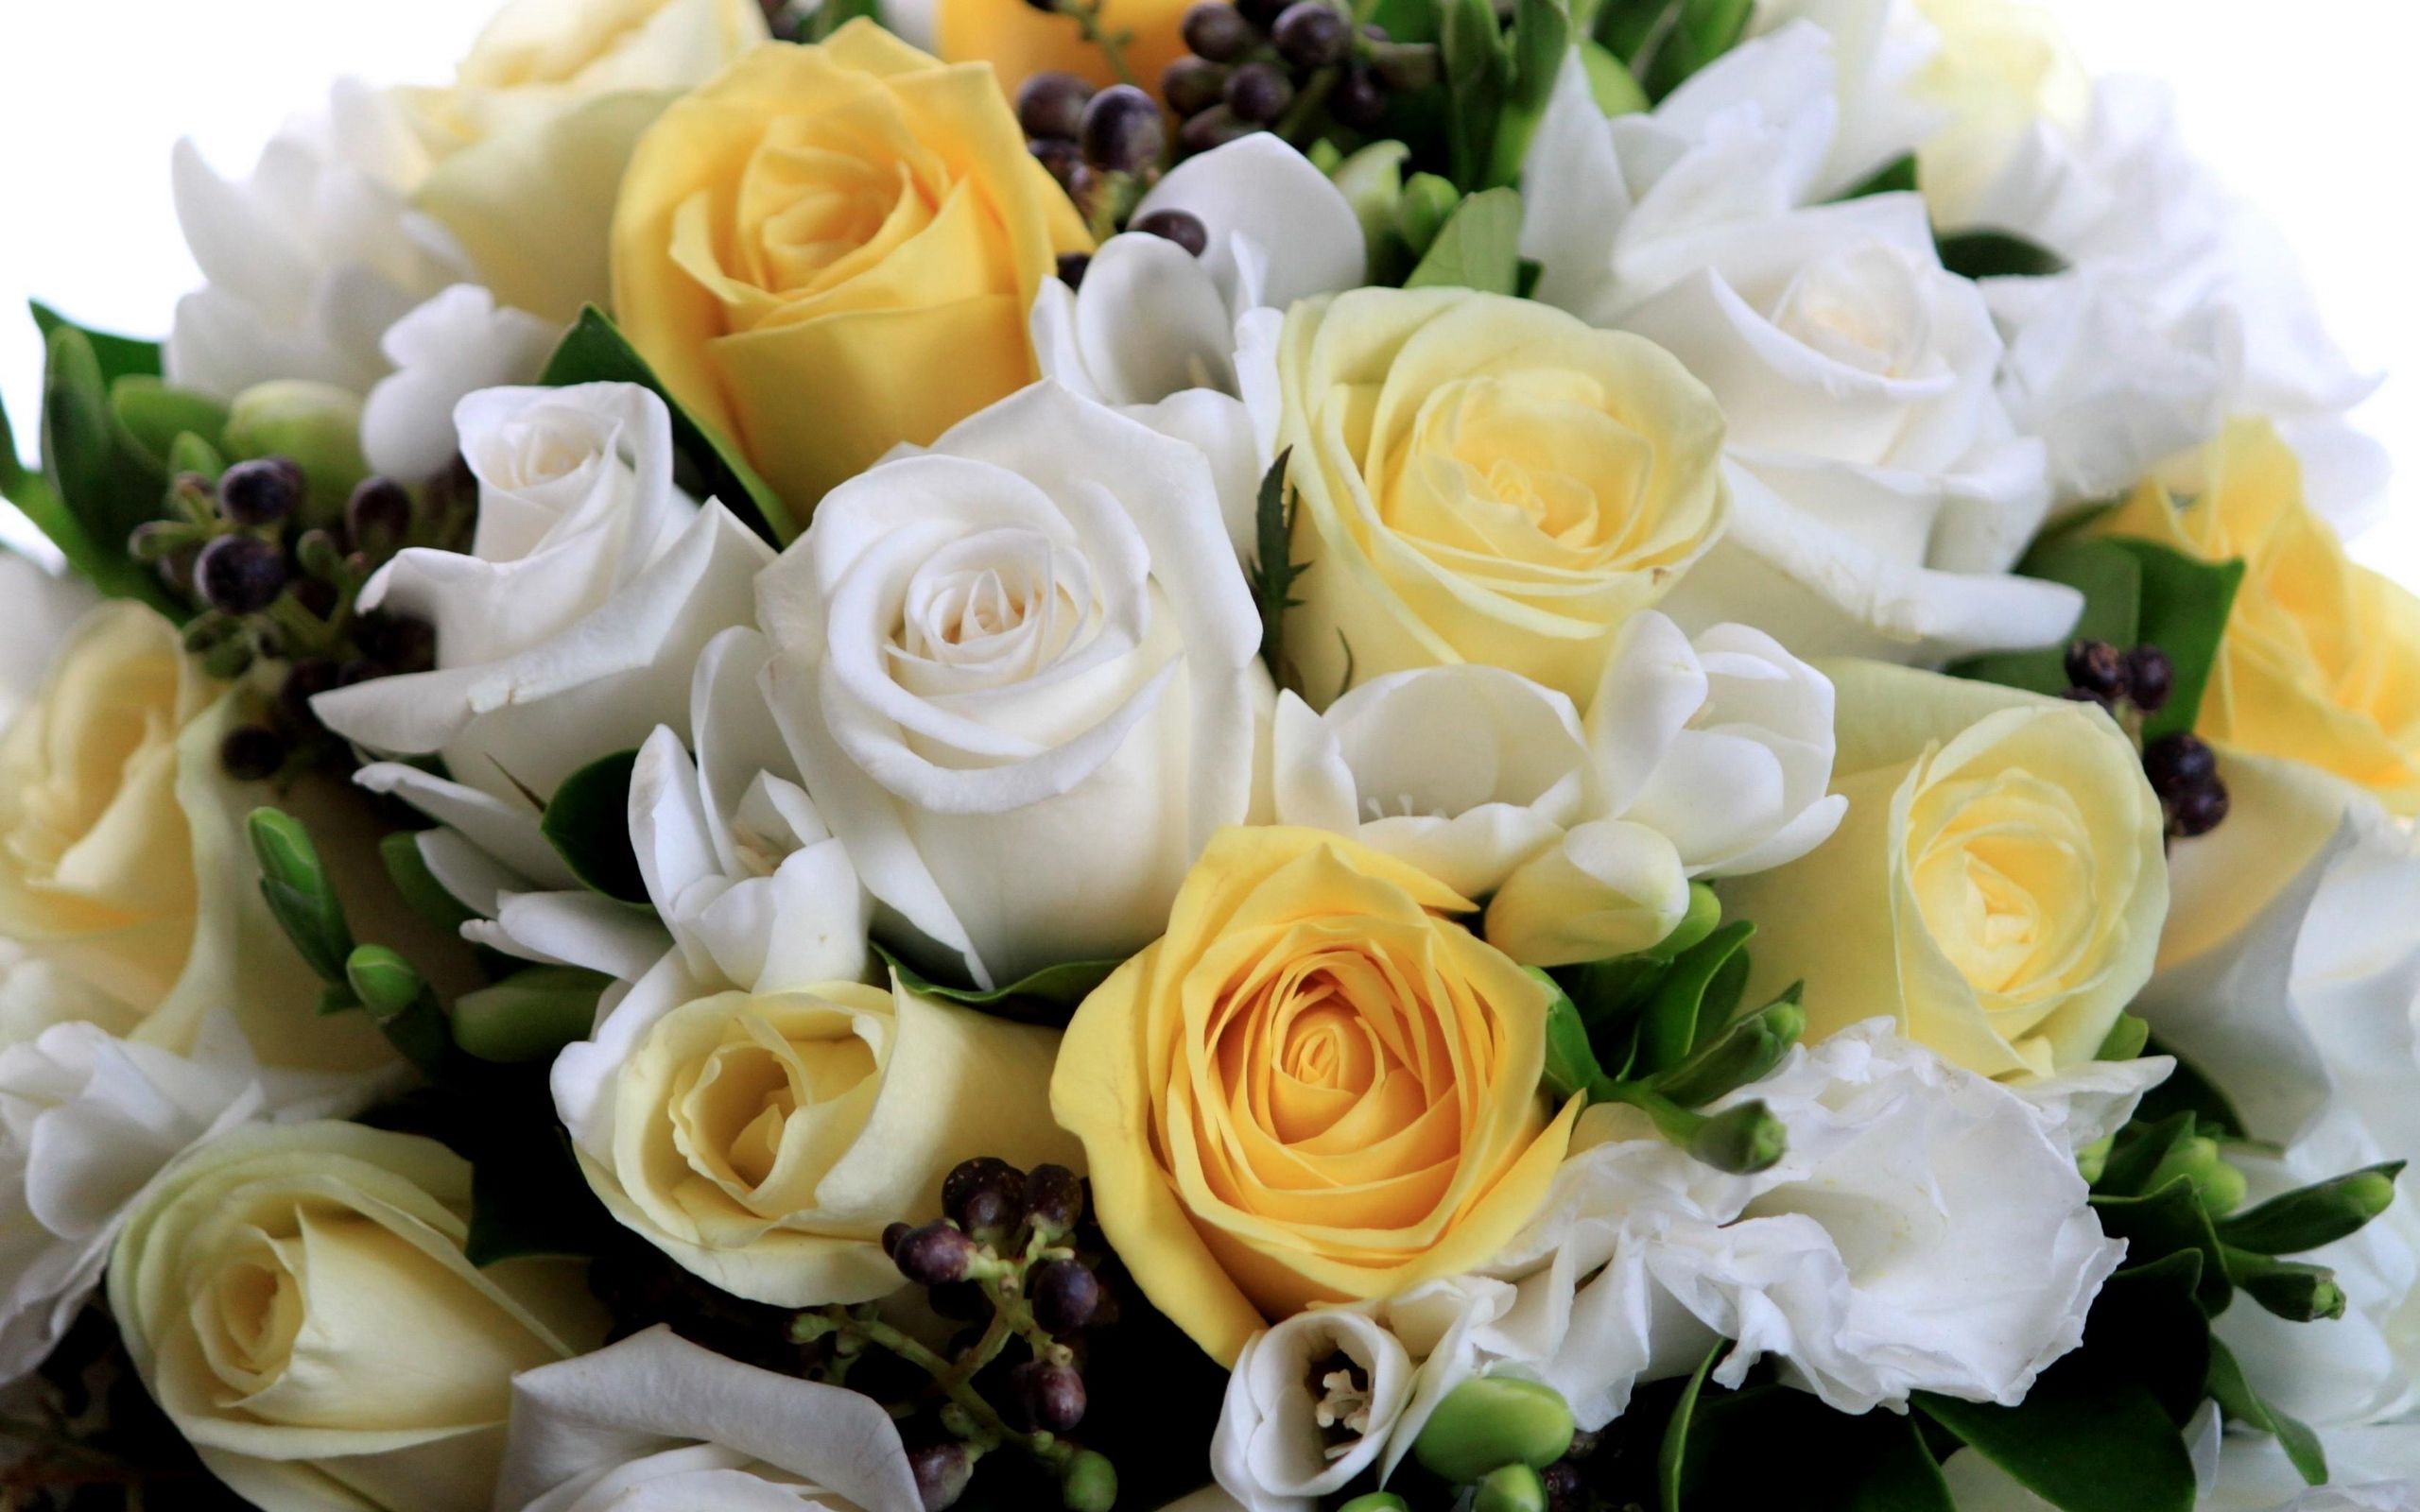 Download wallpaper 2560x1600 roses, flowers, white, yellow, flower